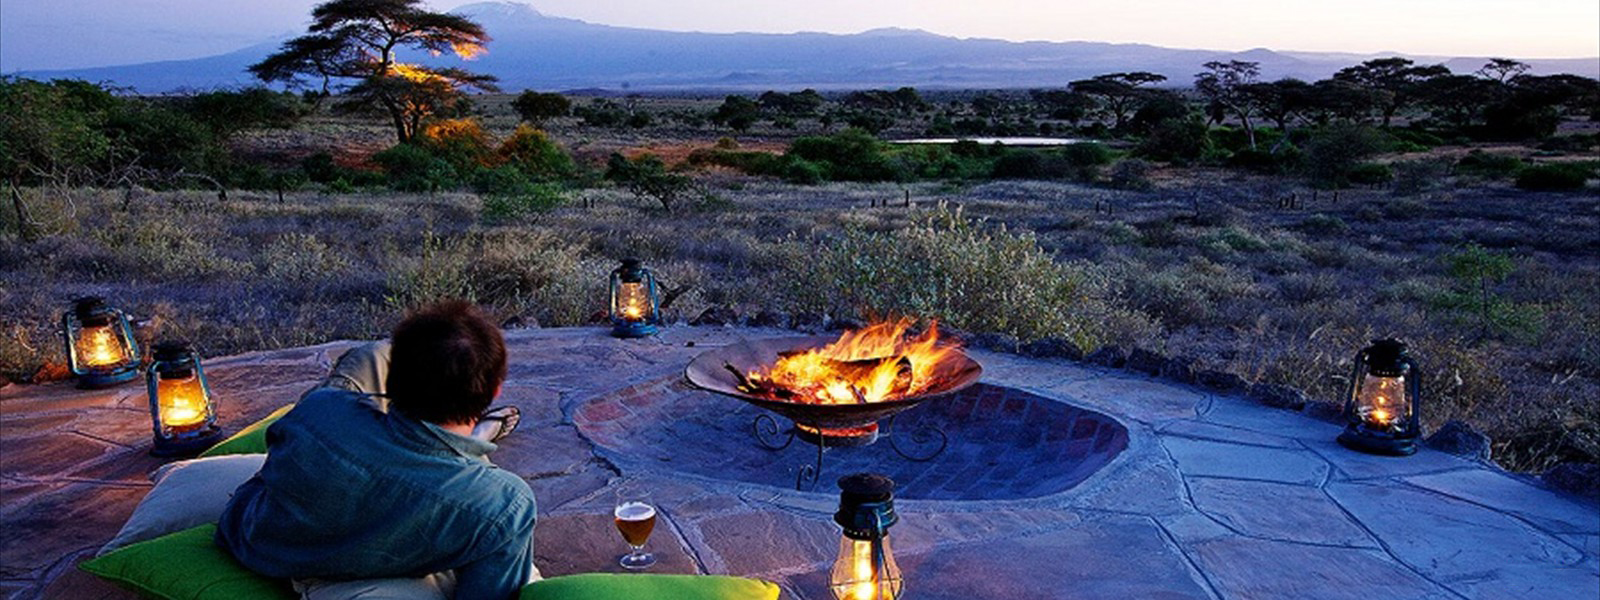 TOURIST ACTIVITIES AMBOSELI NATIONAL PARK,  ATTRACTIONS, ACTIVITIES,  TENTED CAMPS, WHERE TO STAY, AMBOSELI SERENA LODGE, AMBOSELI KIBO VILLA, KIBO VILLA LODGE, AMBOSELI BUFFALO LODGE, AMBOSELI TAWI LODGE, AMBOSELI SOPA LODGE, KIBO SAFARI CAMP AMBOSELI